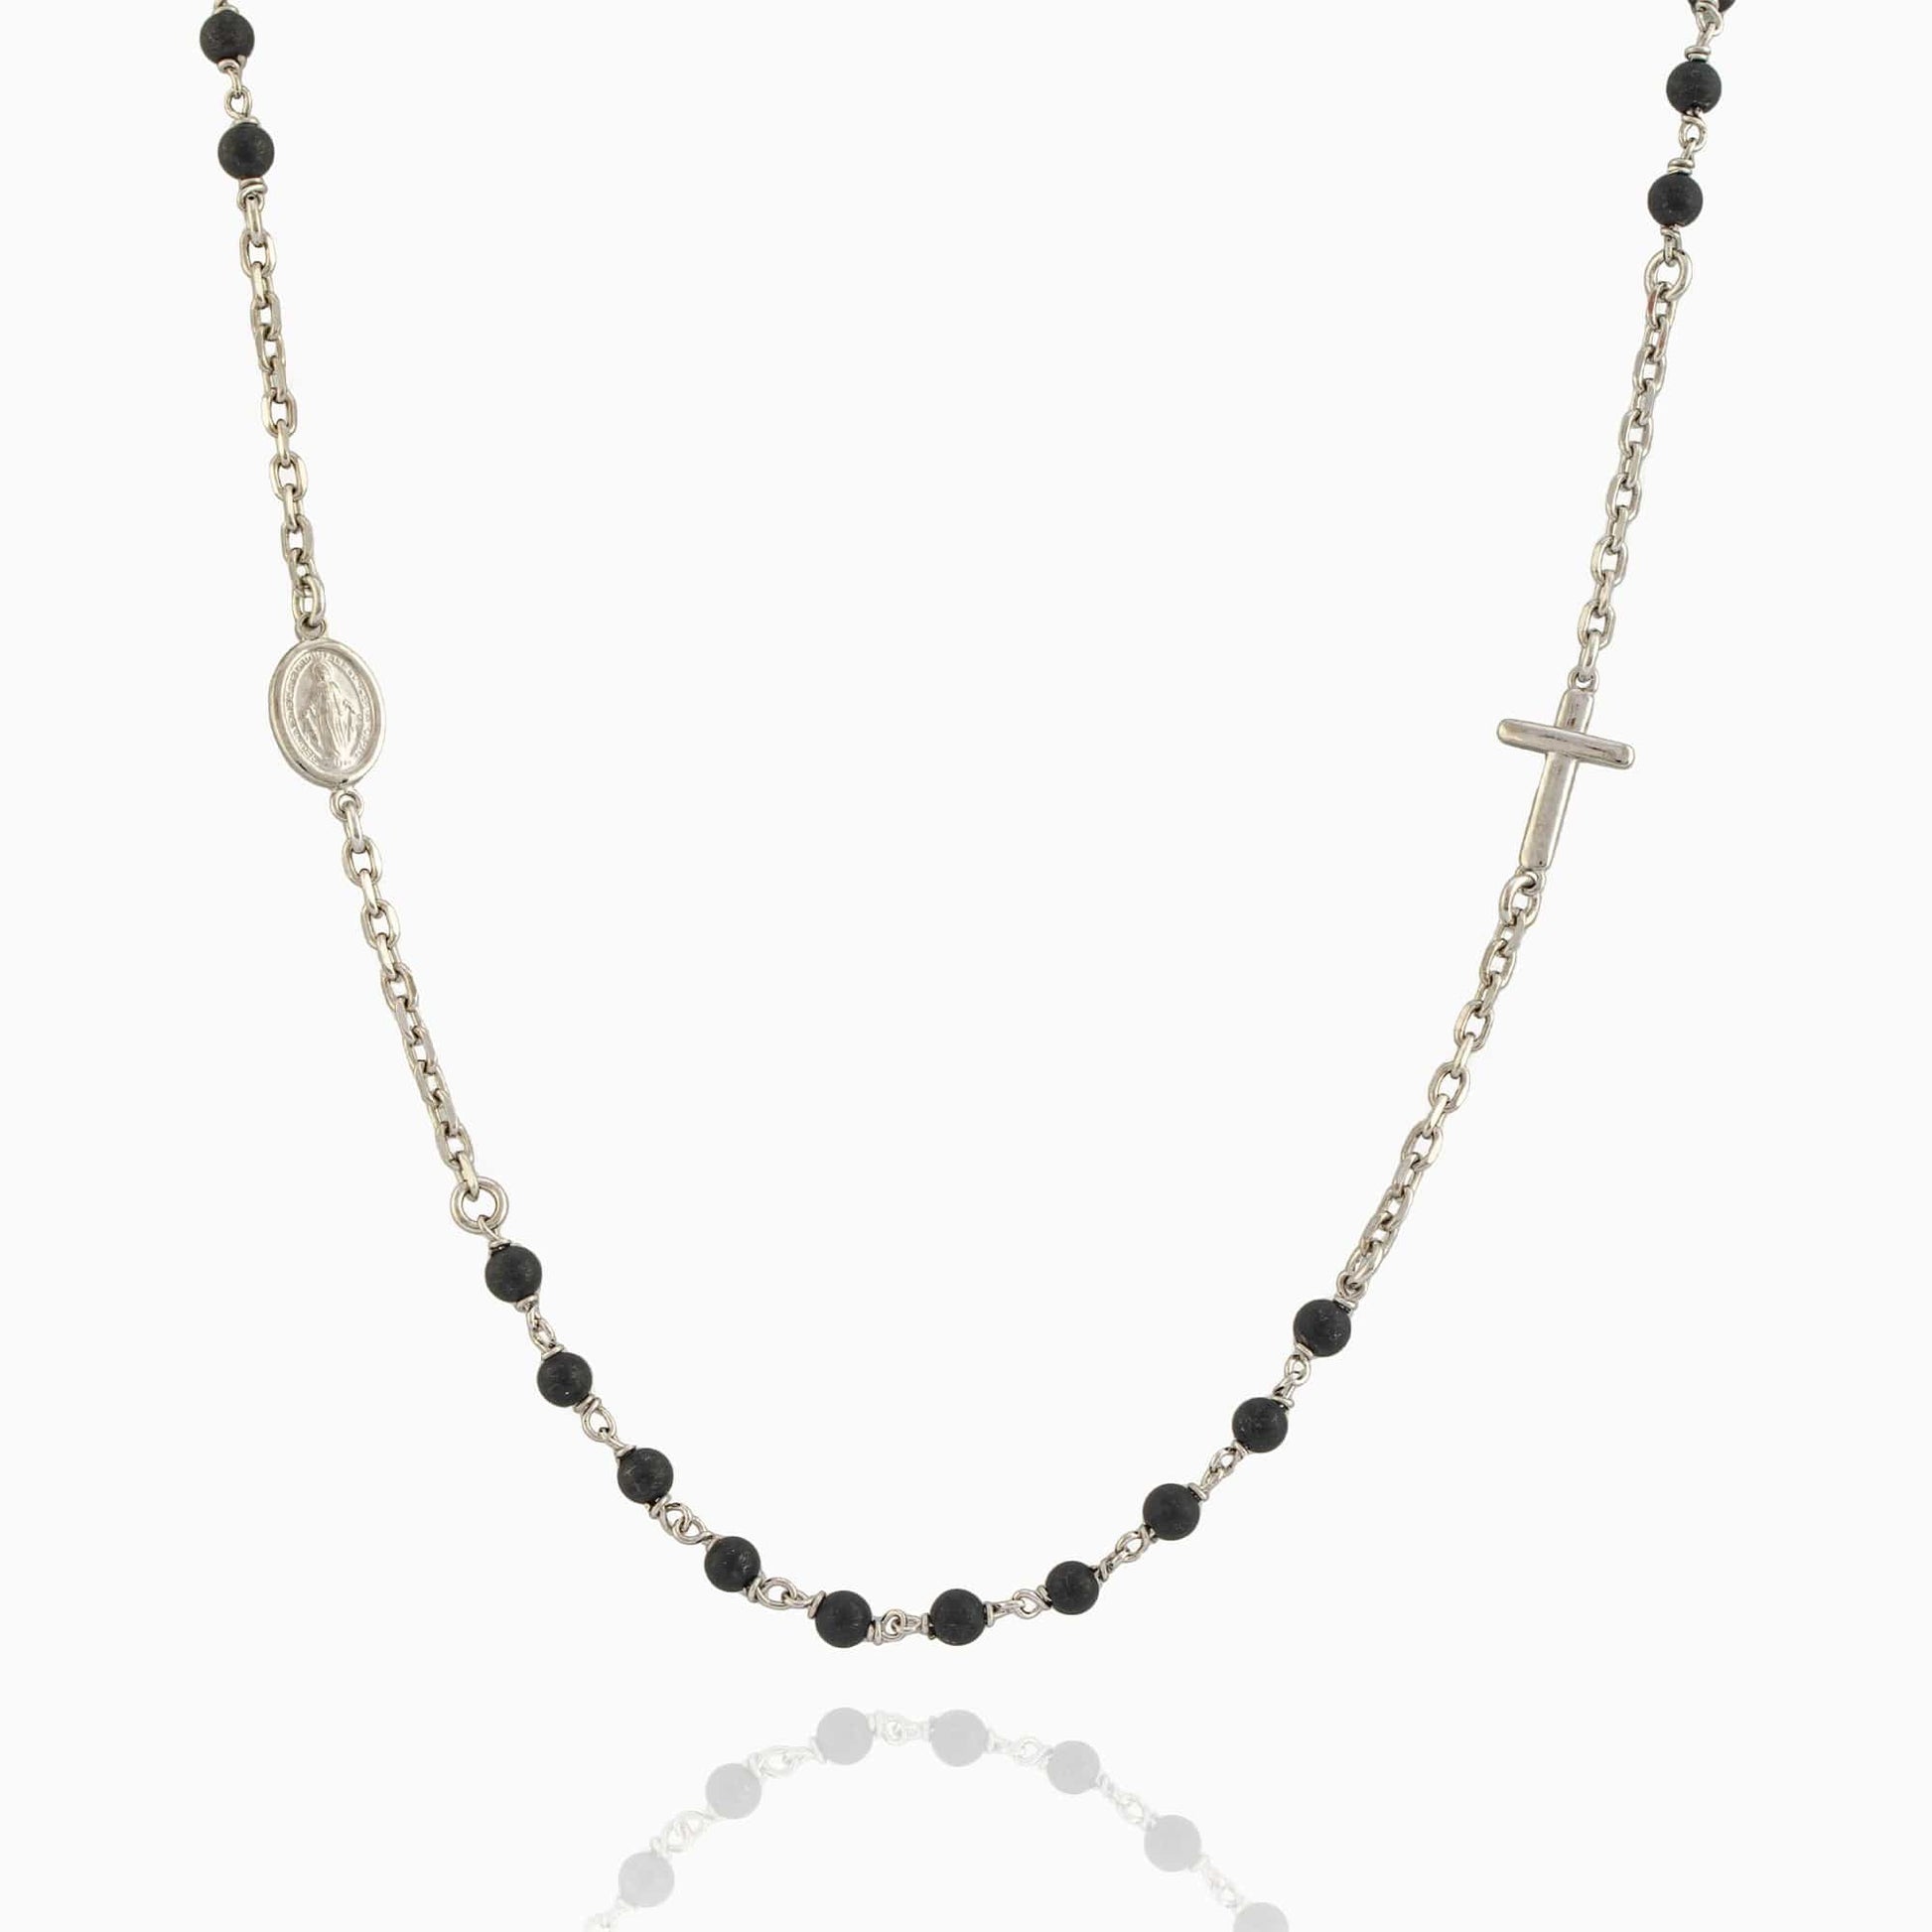 MONDO CATTOLICO Prayer Beads Cm 68+4 (26.8 in+1.6) STERLING SILVER NECKLACE ROSARY BLACK BEADS